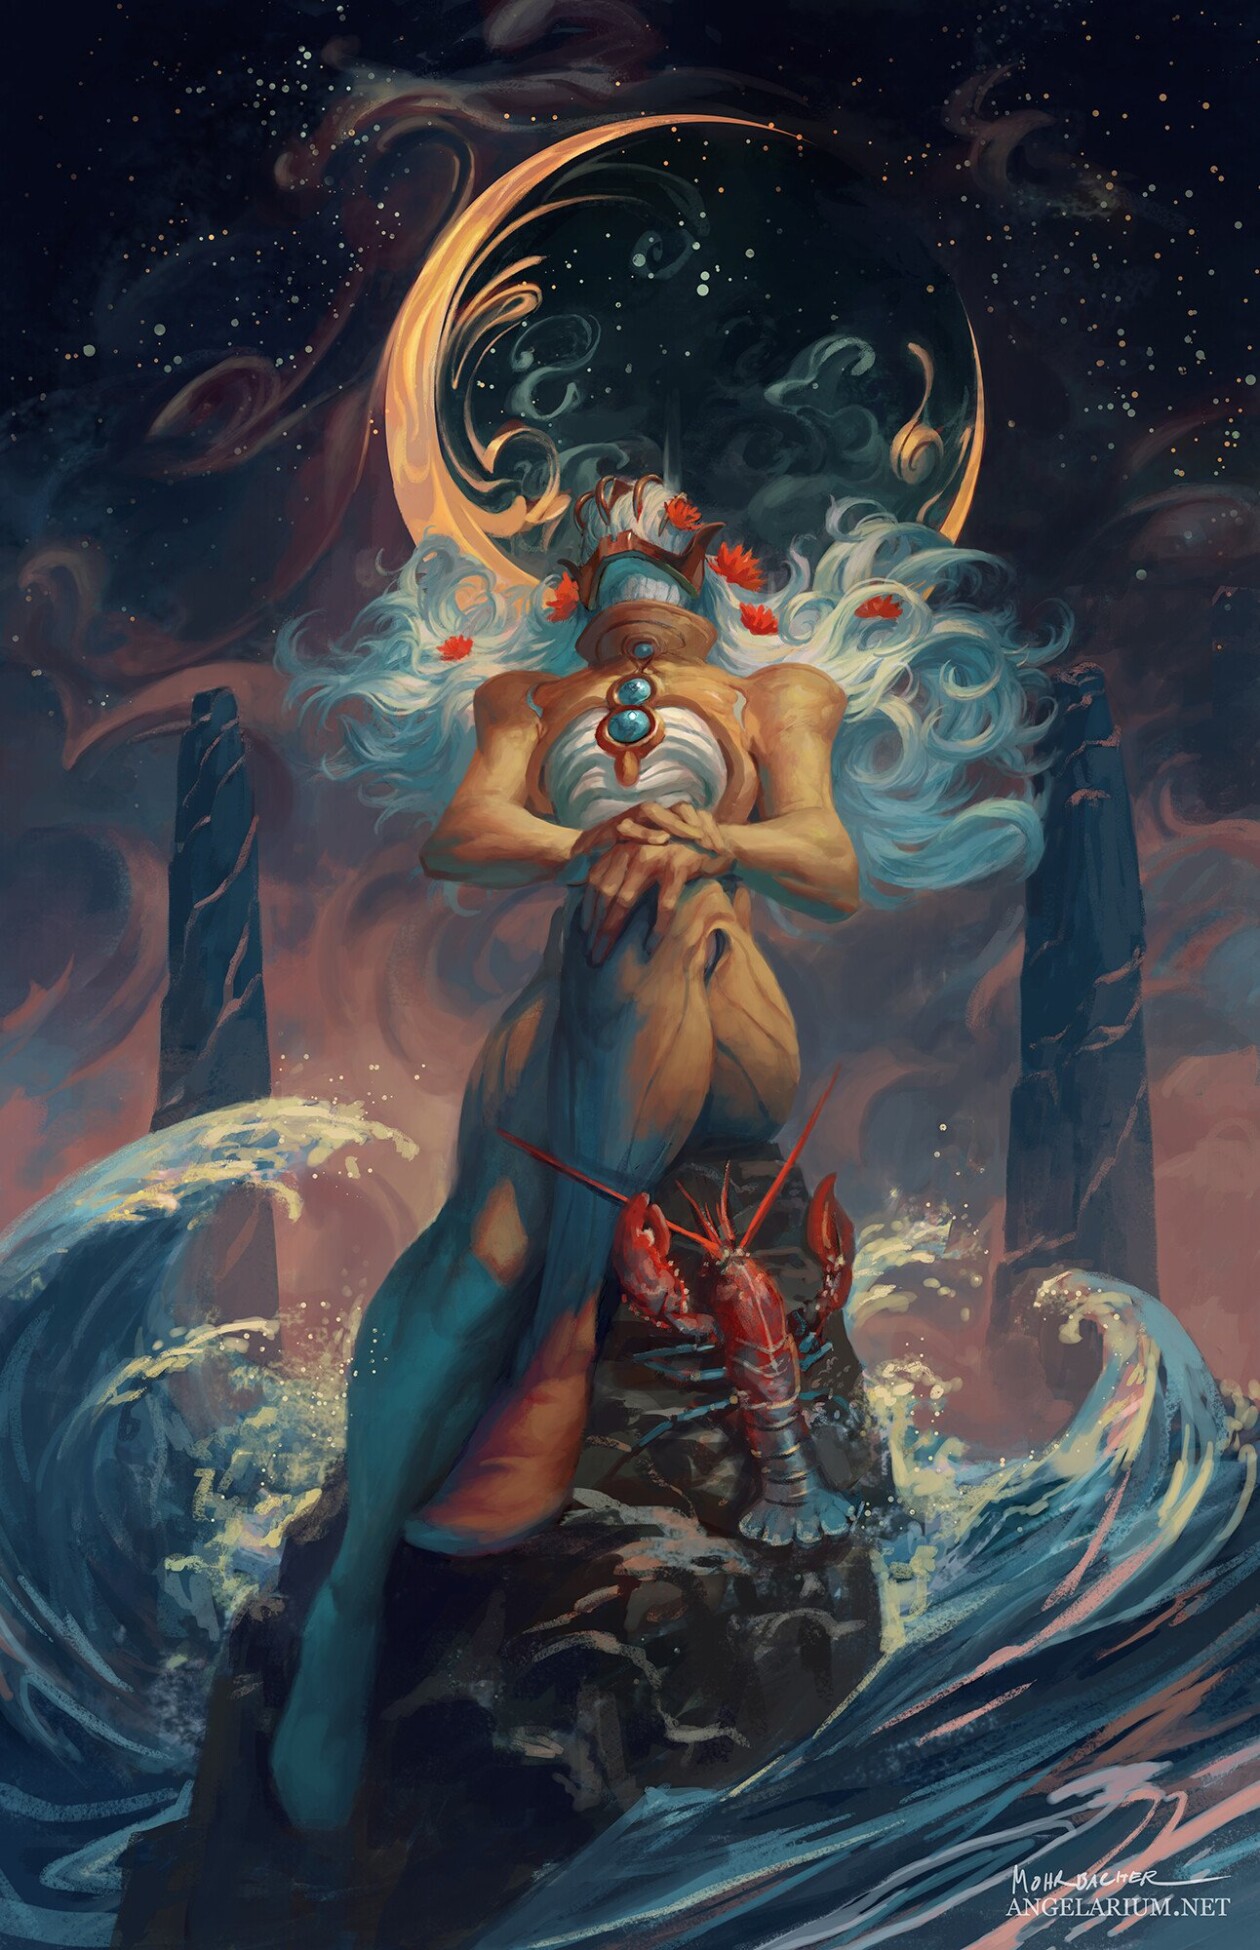 Peter Mohrbacher Blends Surrealism With Fantasy To Create Powerful Magical Beings (9)